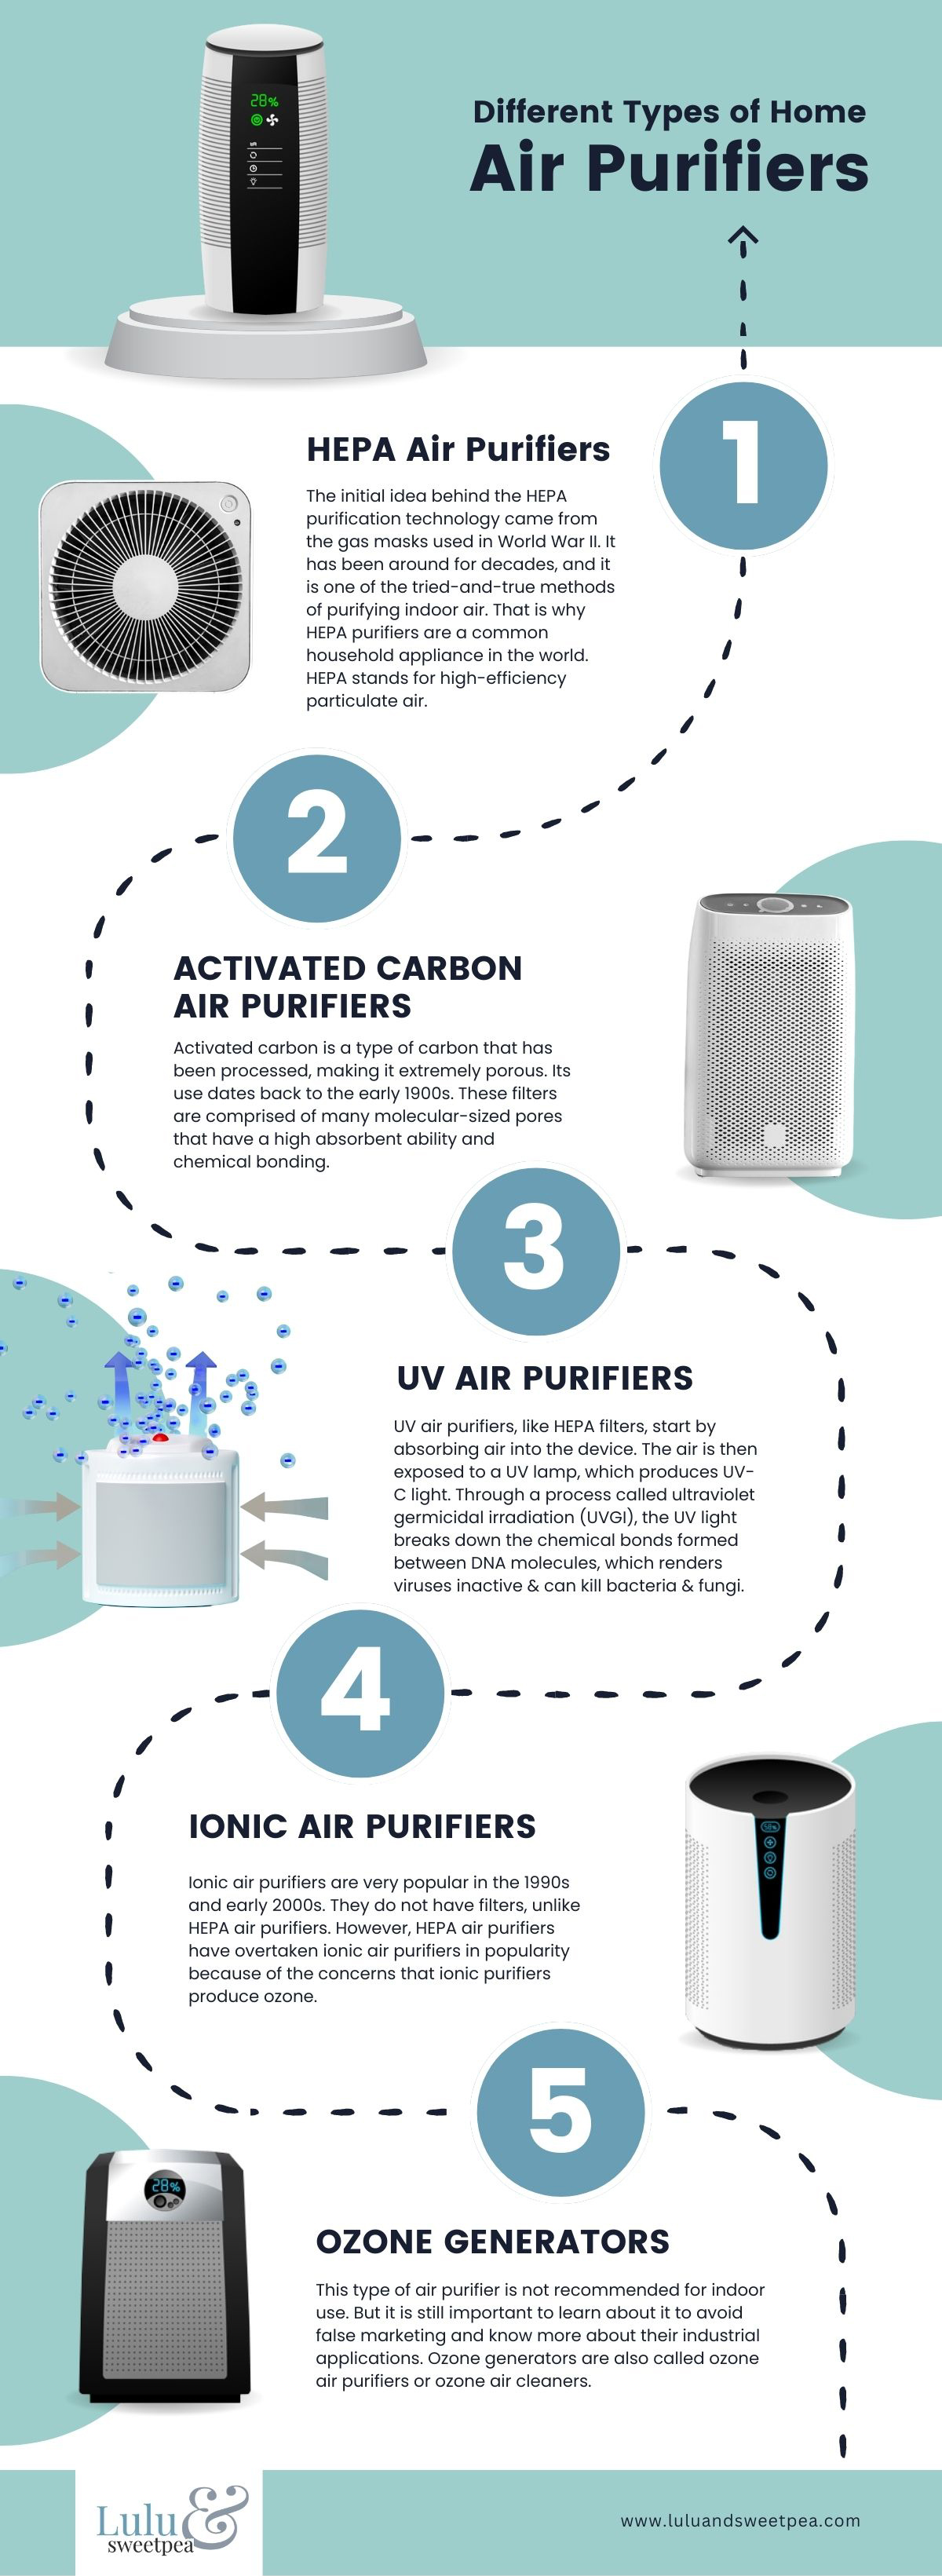 Different Types of Home Air Purifiers